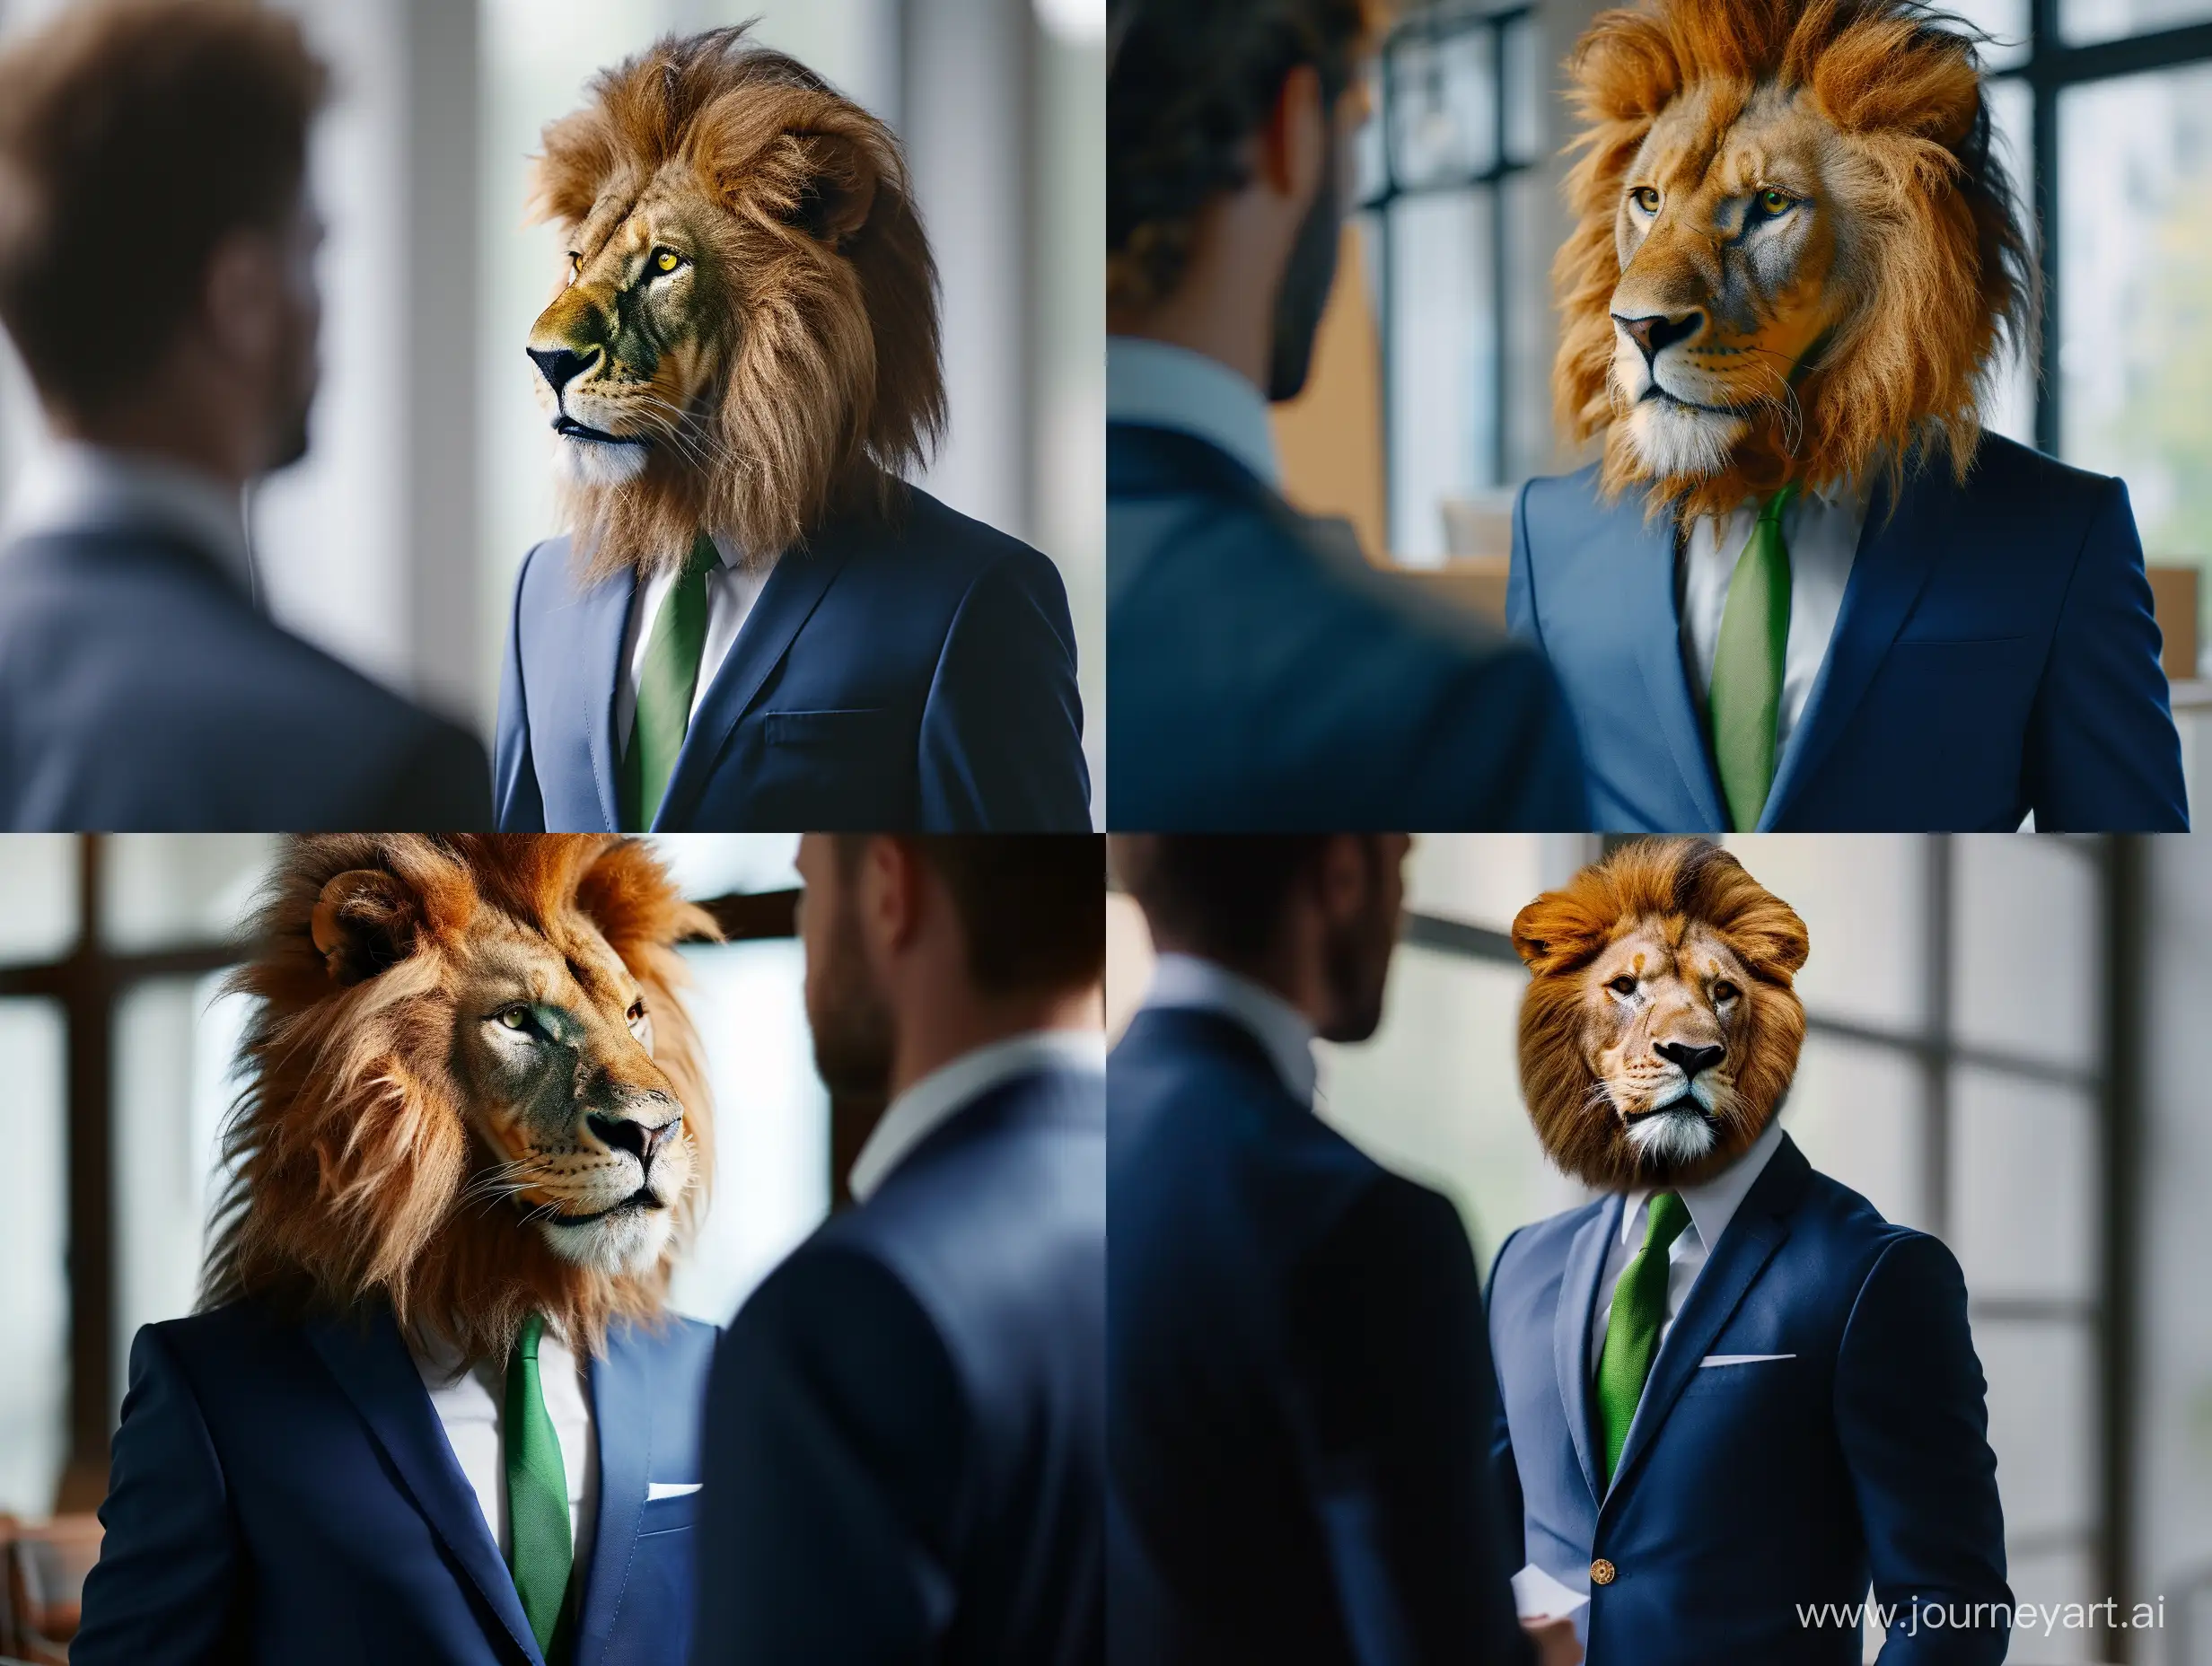 a man with a lion's head communicates with a client in the office. The man is dressed in a classic blue suit with a green tie, he is 26 years old.